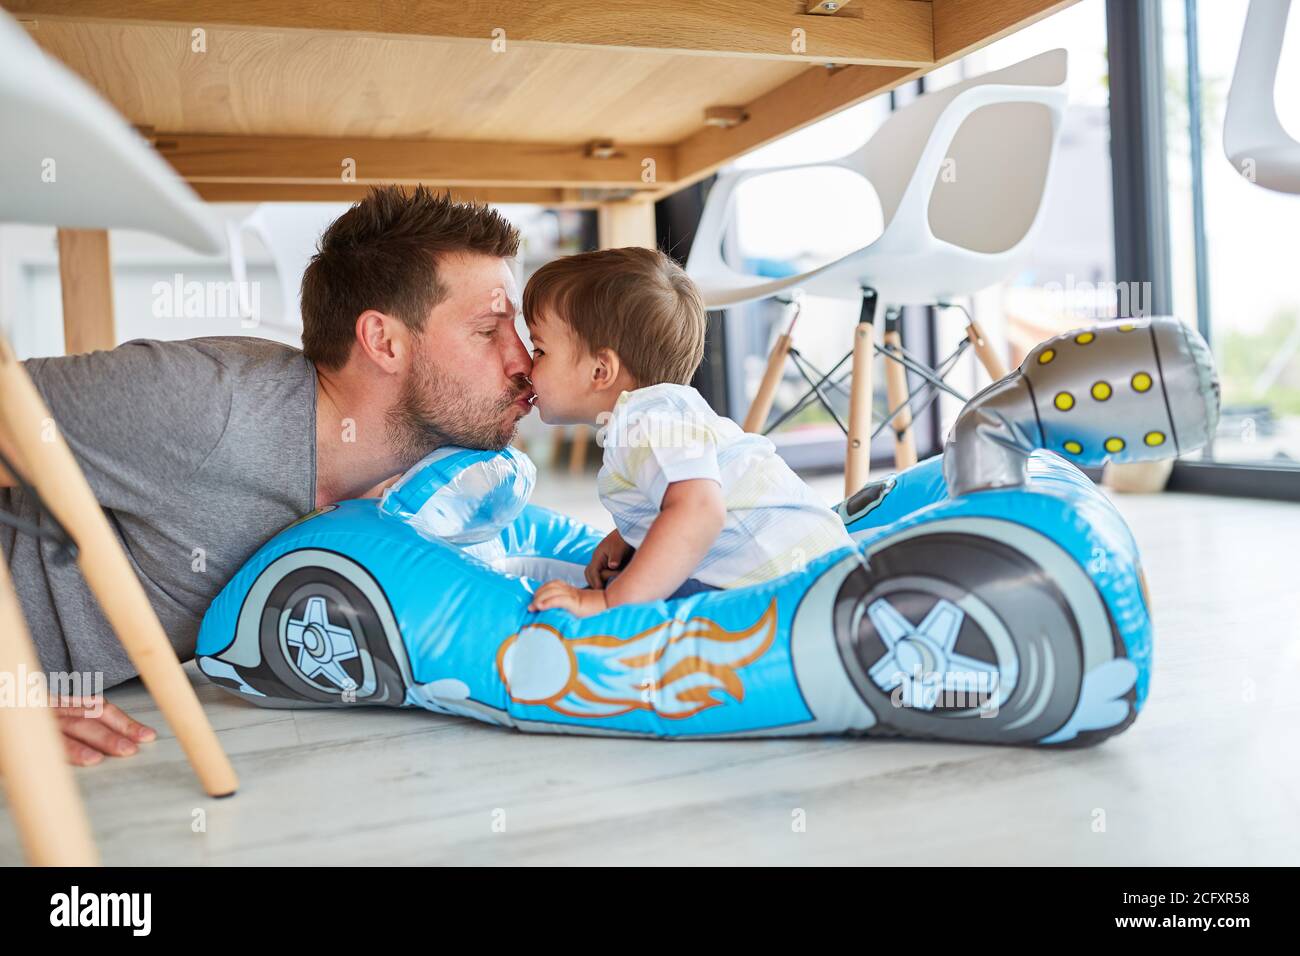 Father gives his son a kiss in the child's car while playing in the living room Stock Photo